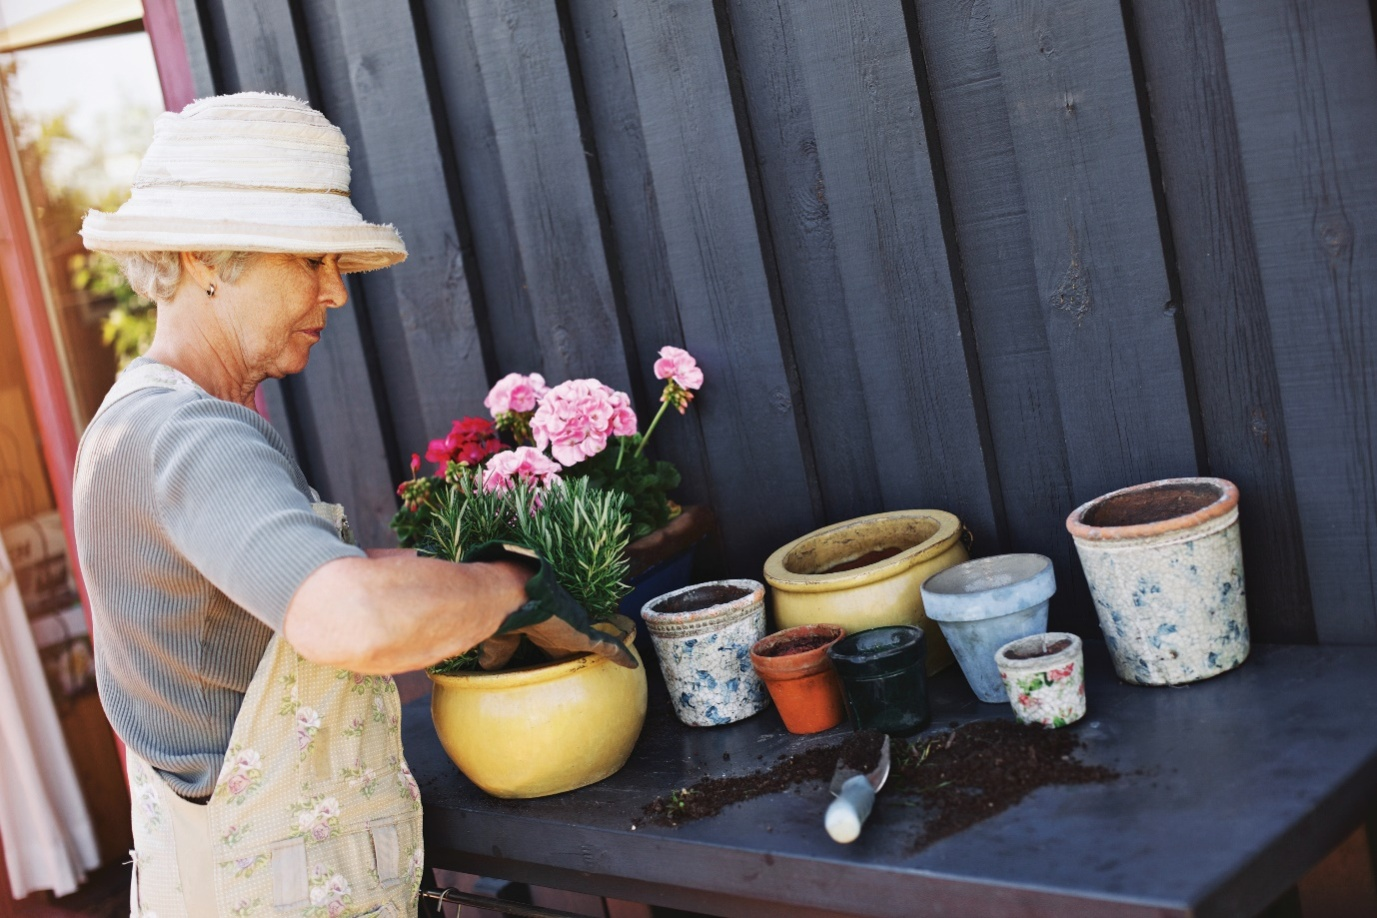 A senior filling a planter with a flowery plant